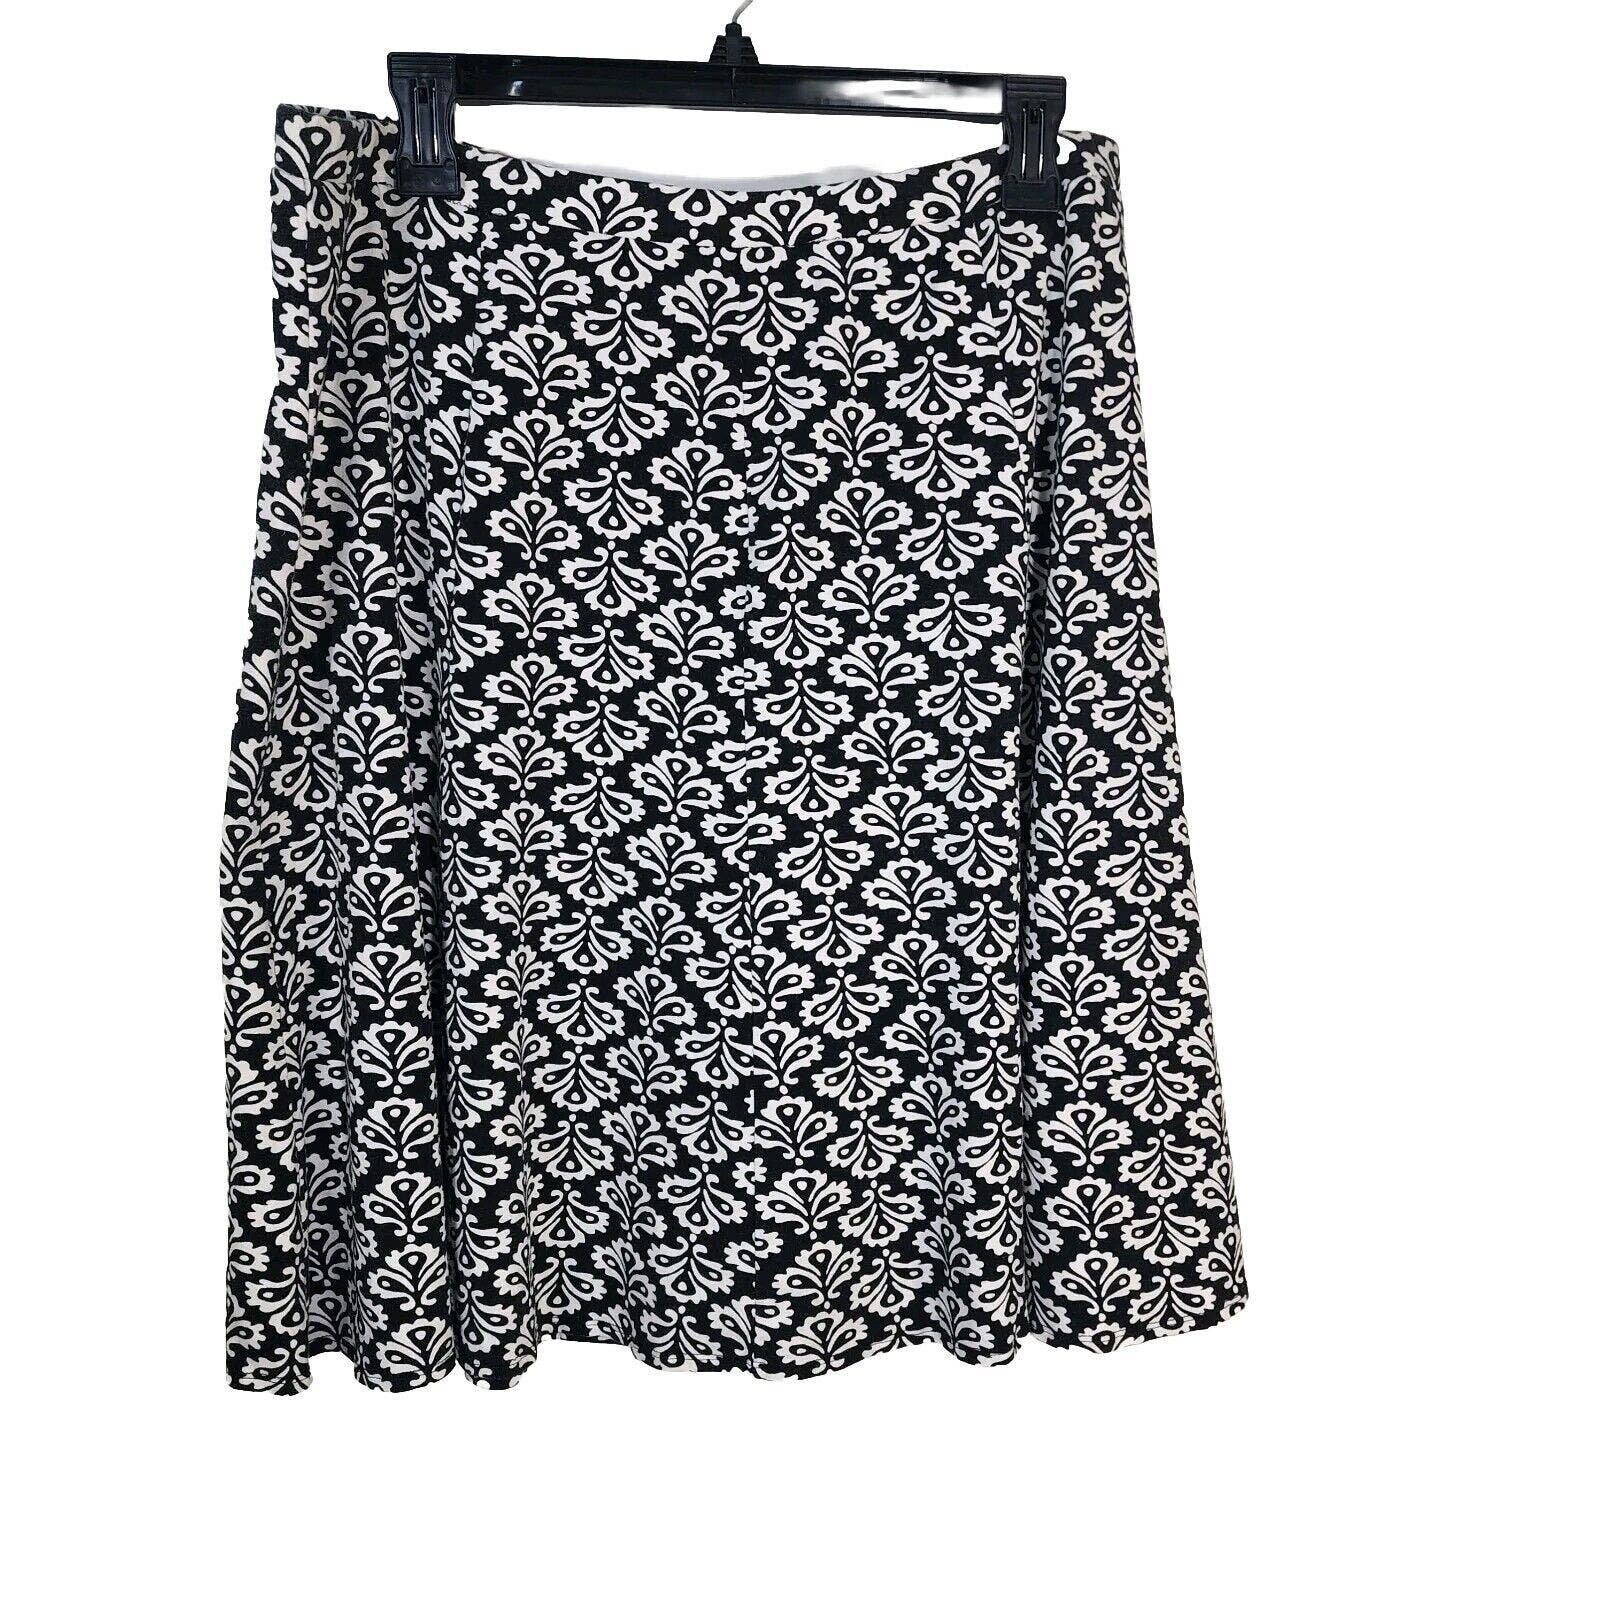 cheapest place to buy  Talbots Woman Skirt Size X Flare Pull On Black White Paisley Knee Length Knit m0QotNStJ US Sale